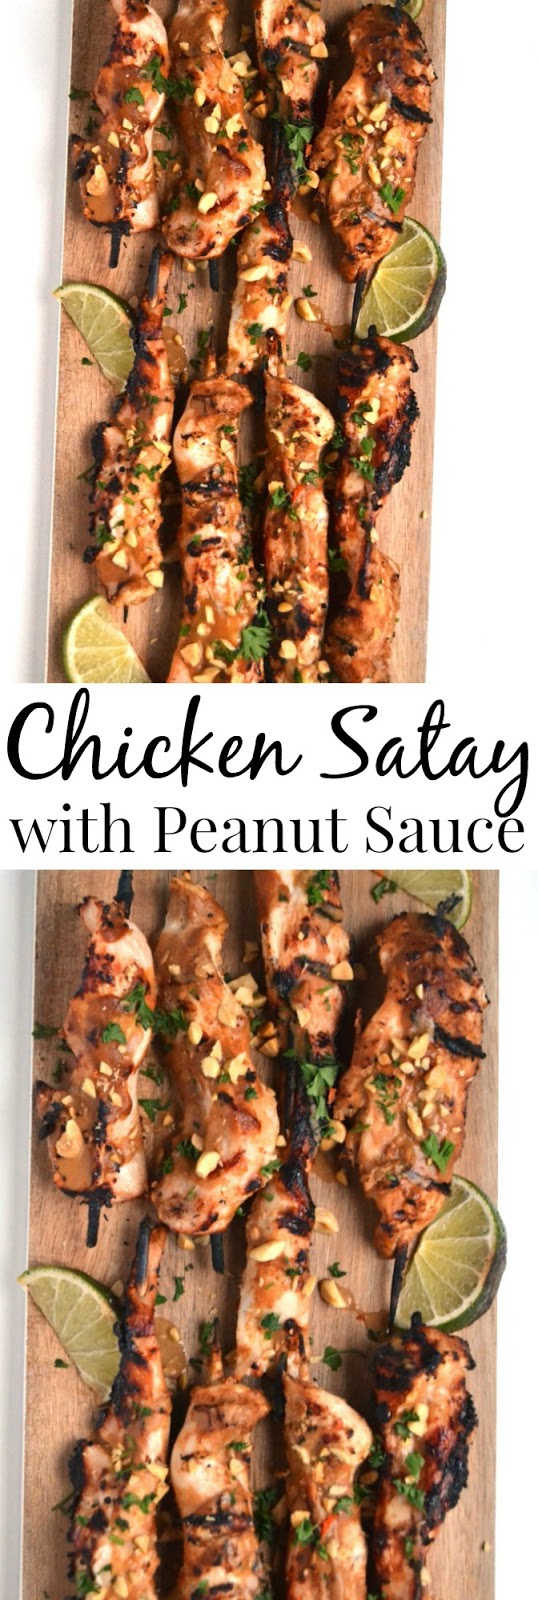 Chicken Satay with Peanut Sauce take 20 minutes to make and is rich in delicious grilled flavors and a tangy peanut sauce! www.nutritionistreviews.com